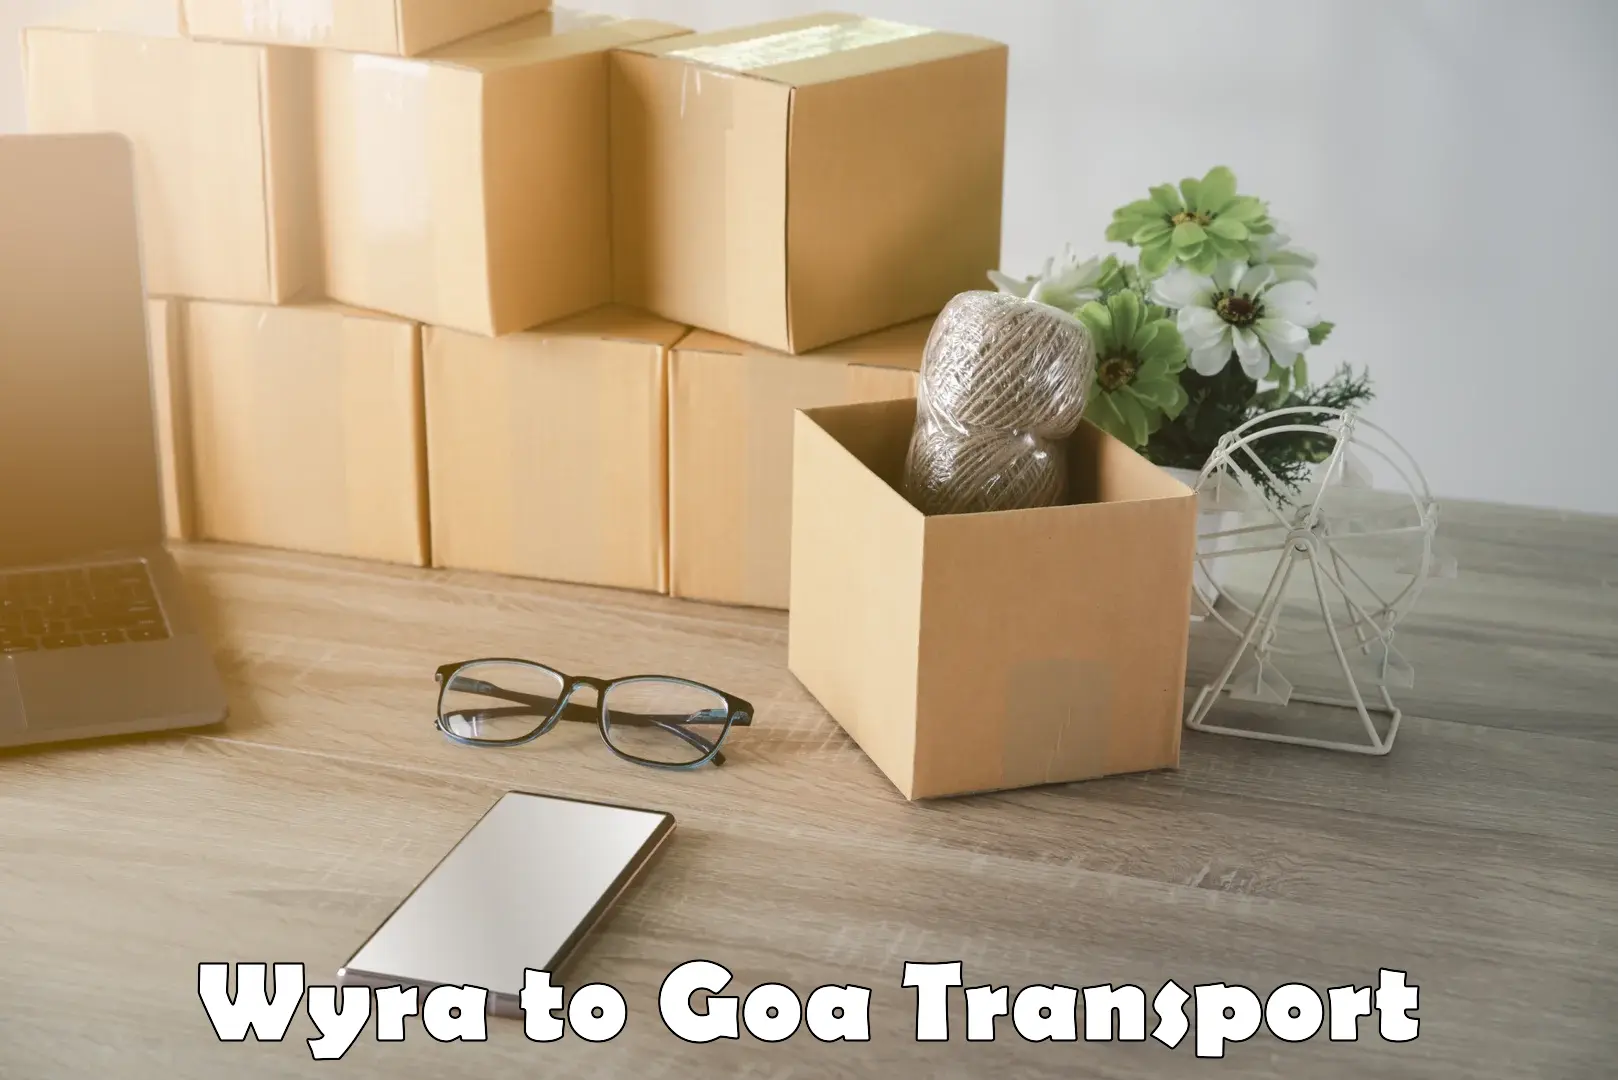 Delivery service Wyra to Goa